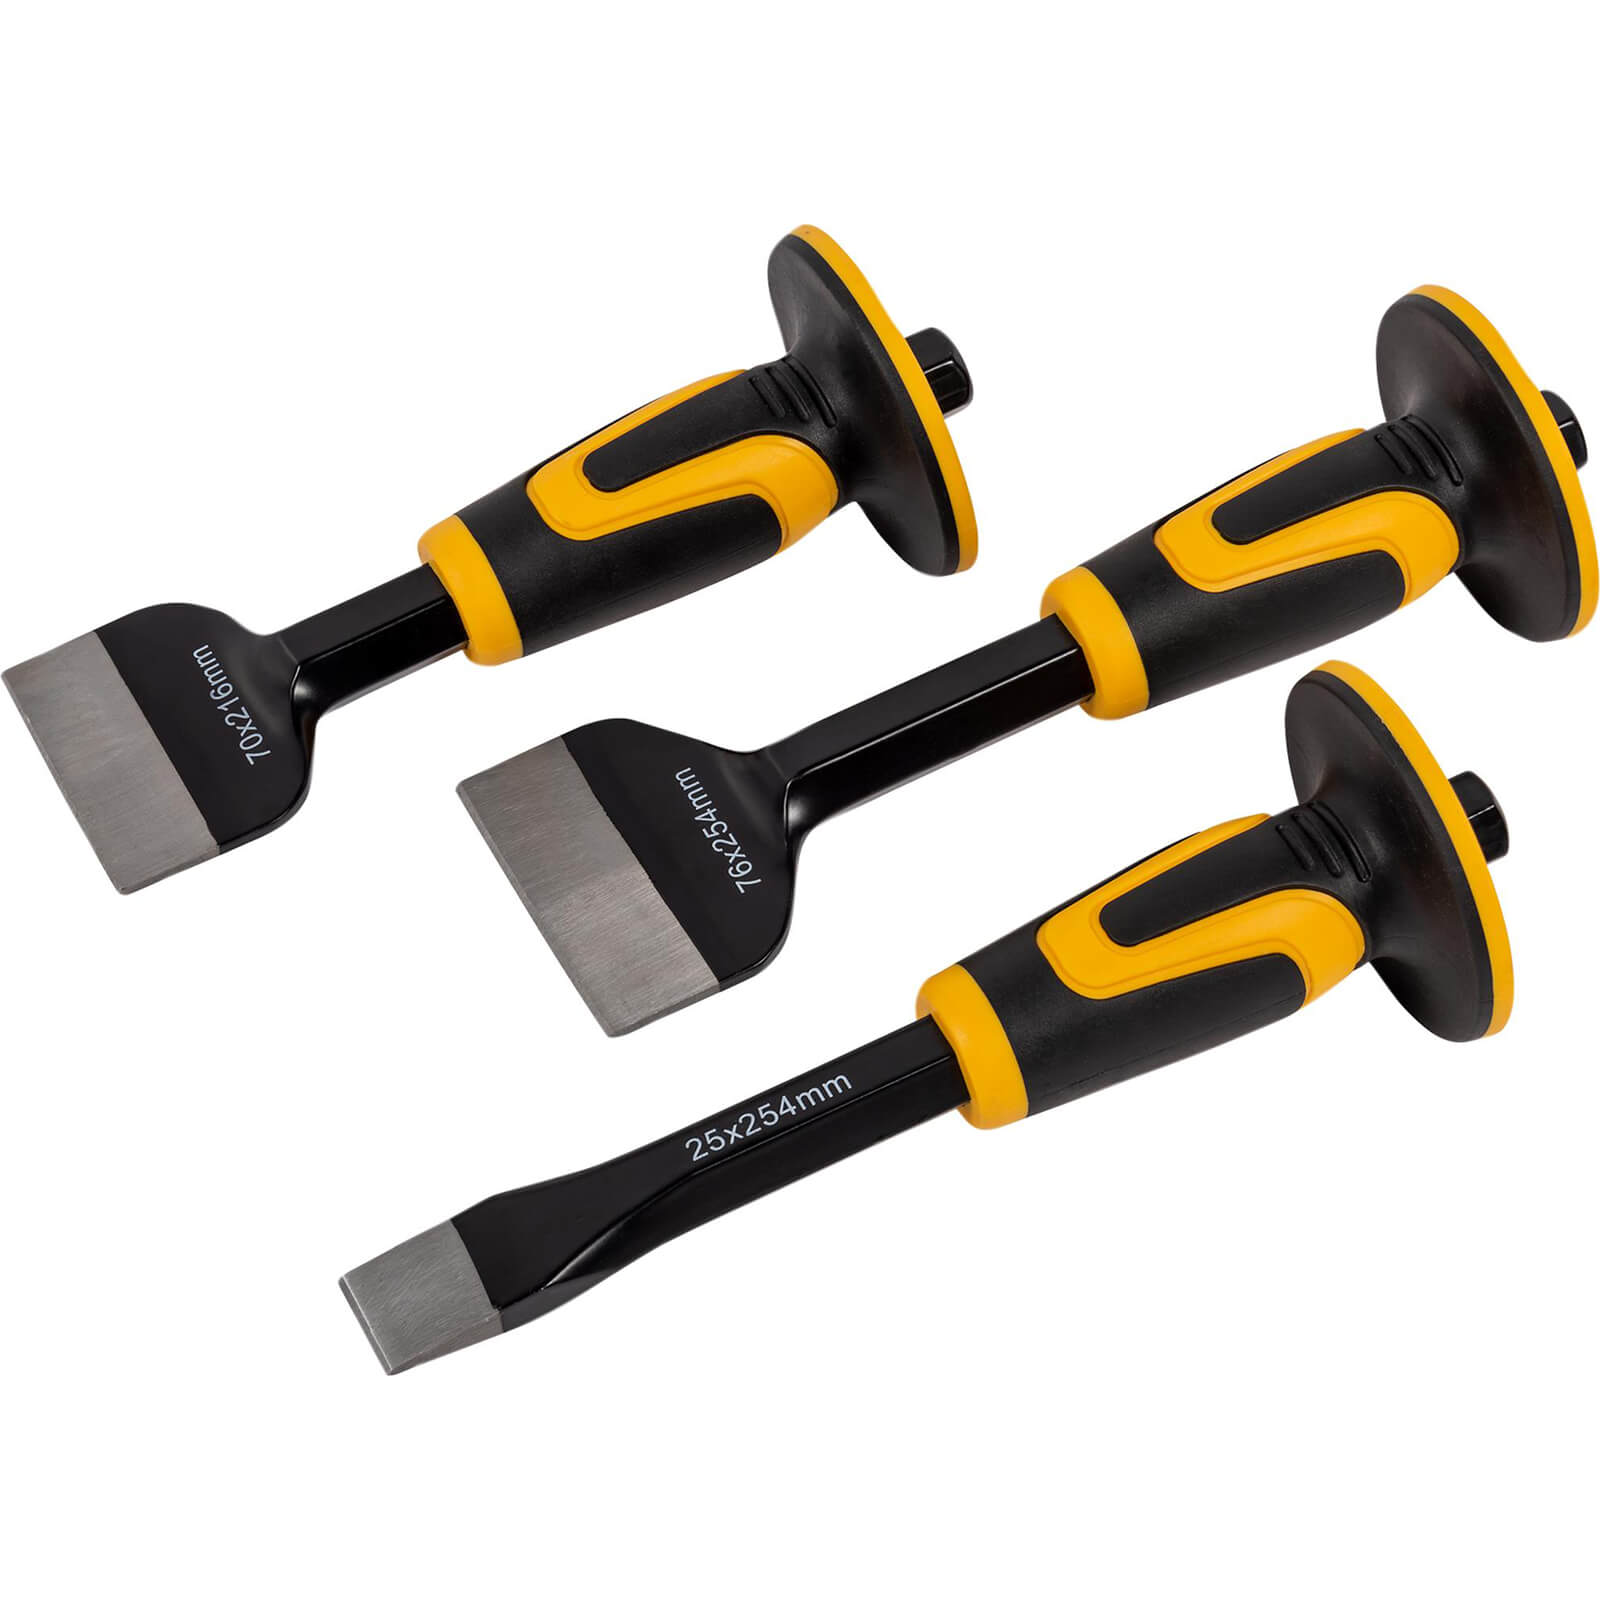 Image of Roughneck 3 piece Chisel and Bolster Set